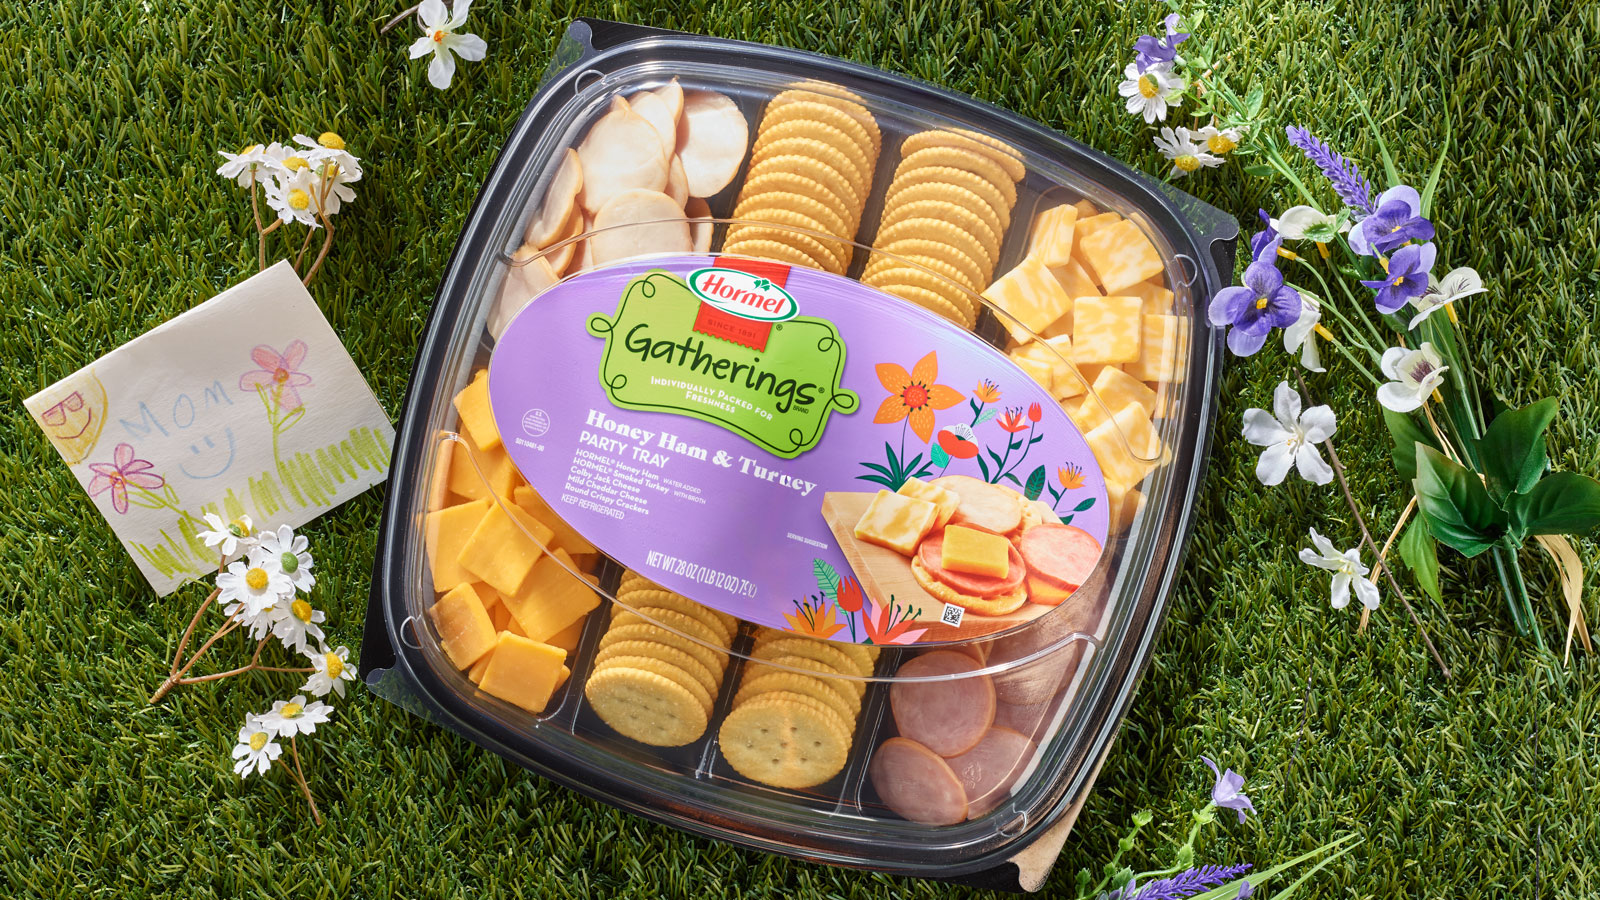 A honey ham and turkey party tray on a bed of grass with flowers